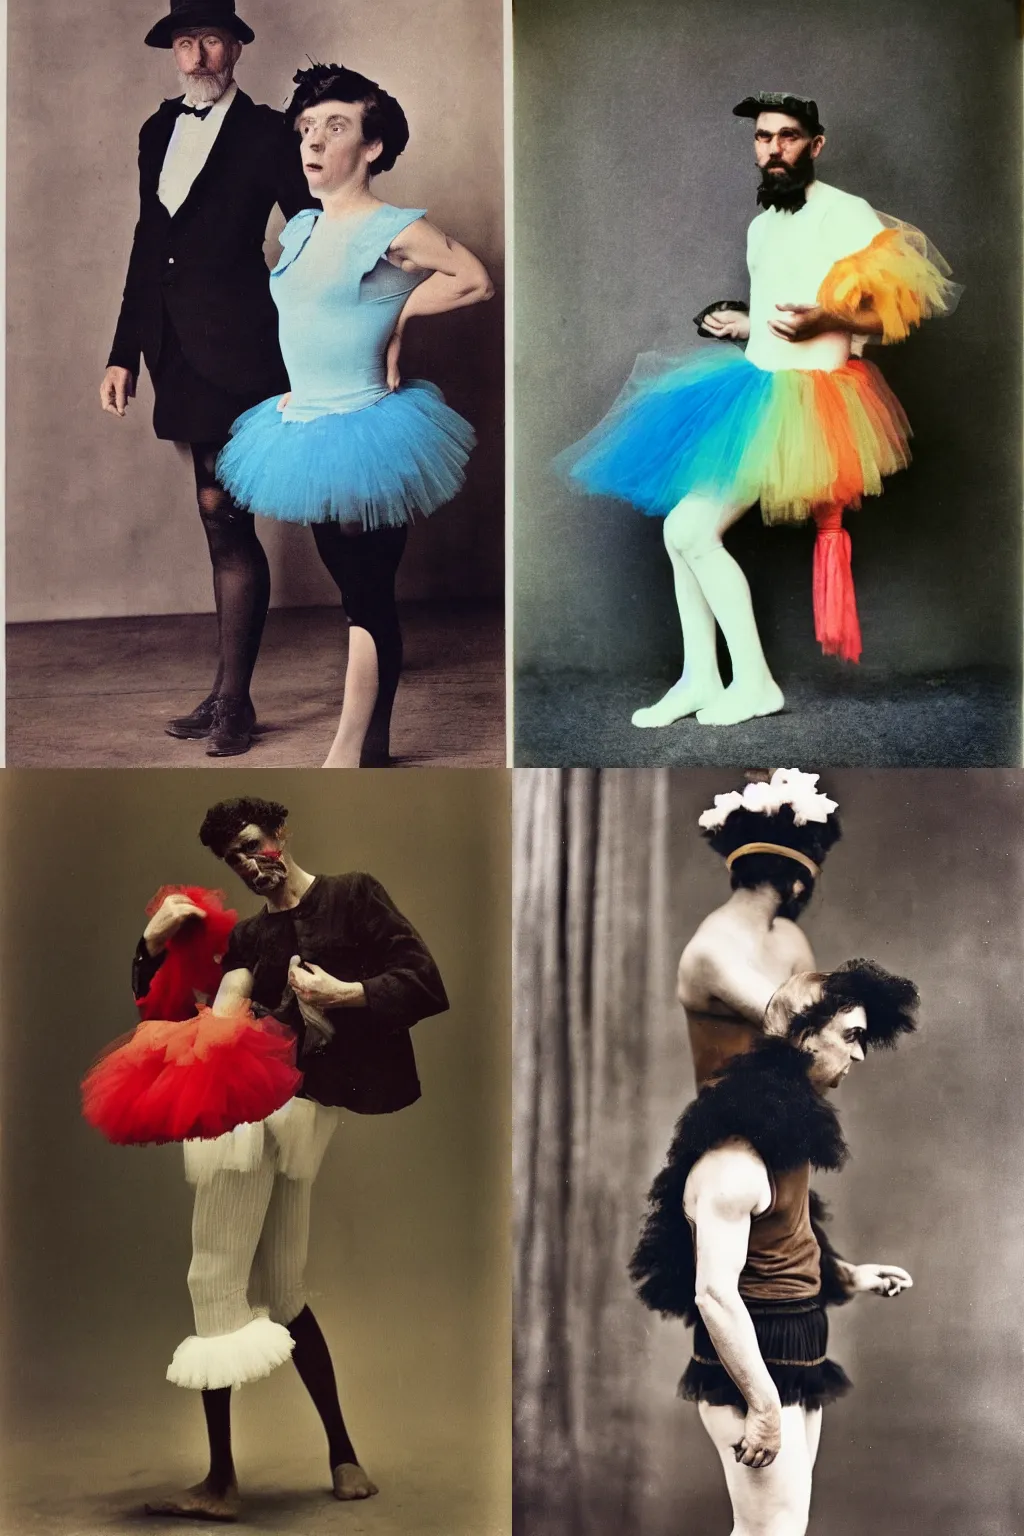 Prompt: A man wearing a tutu. Color photo. Contemporary.